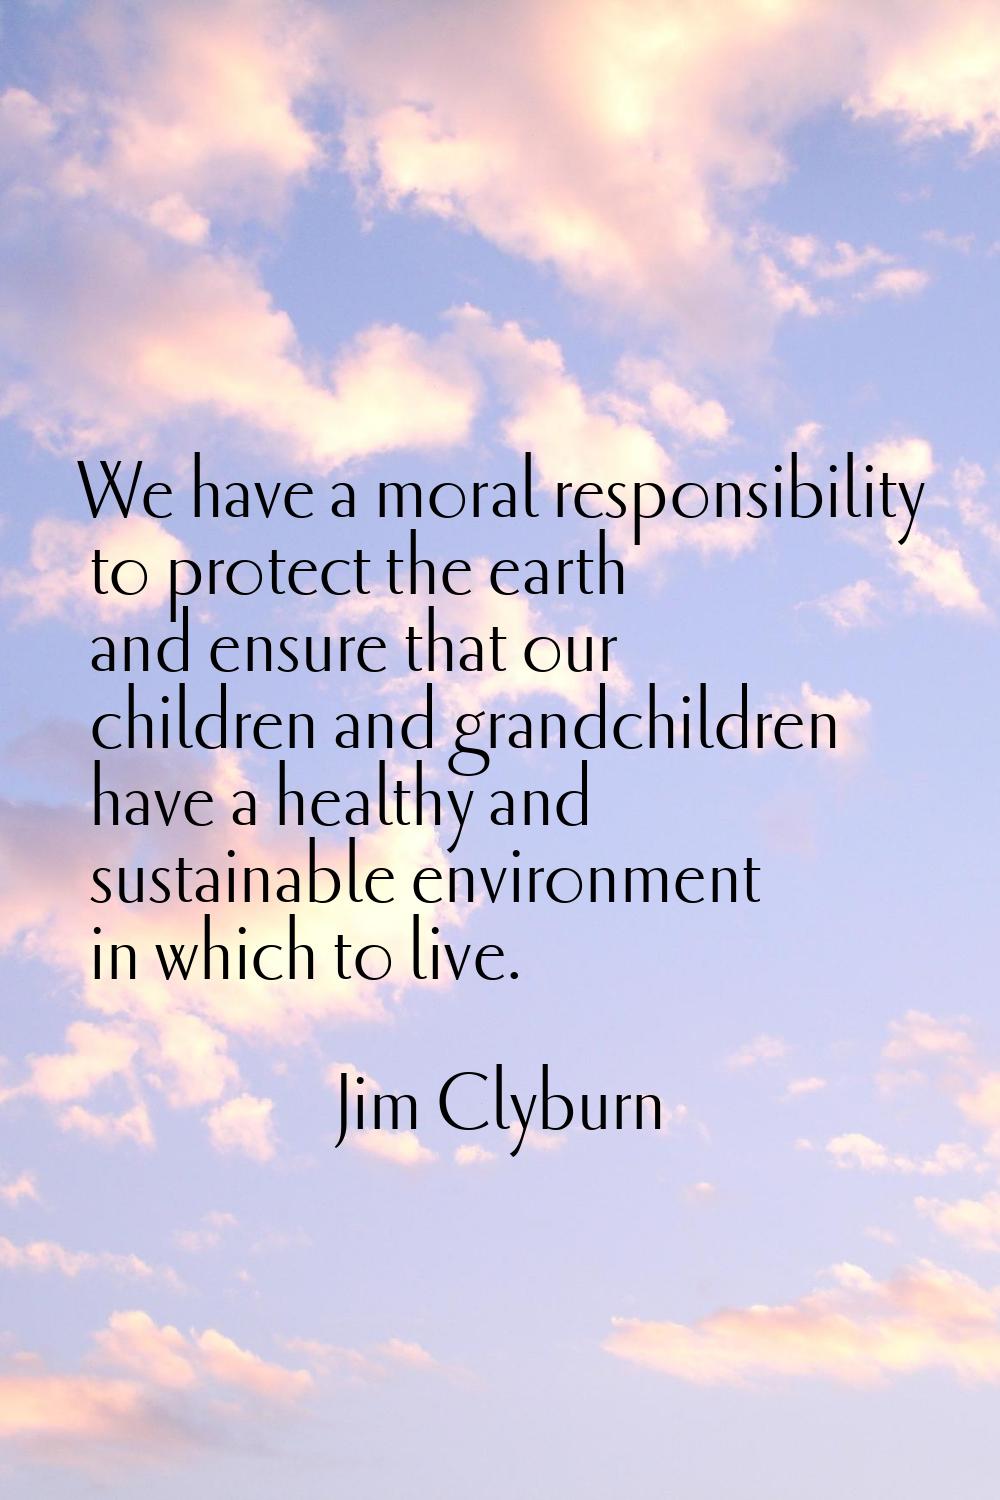 We have a moral responsibility to protect the earth and ensure that our children and grandchildren 